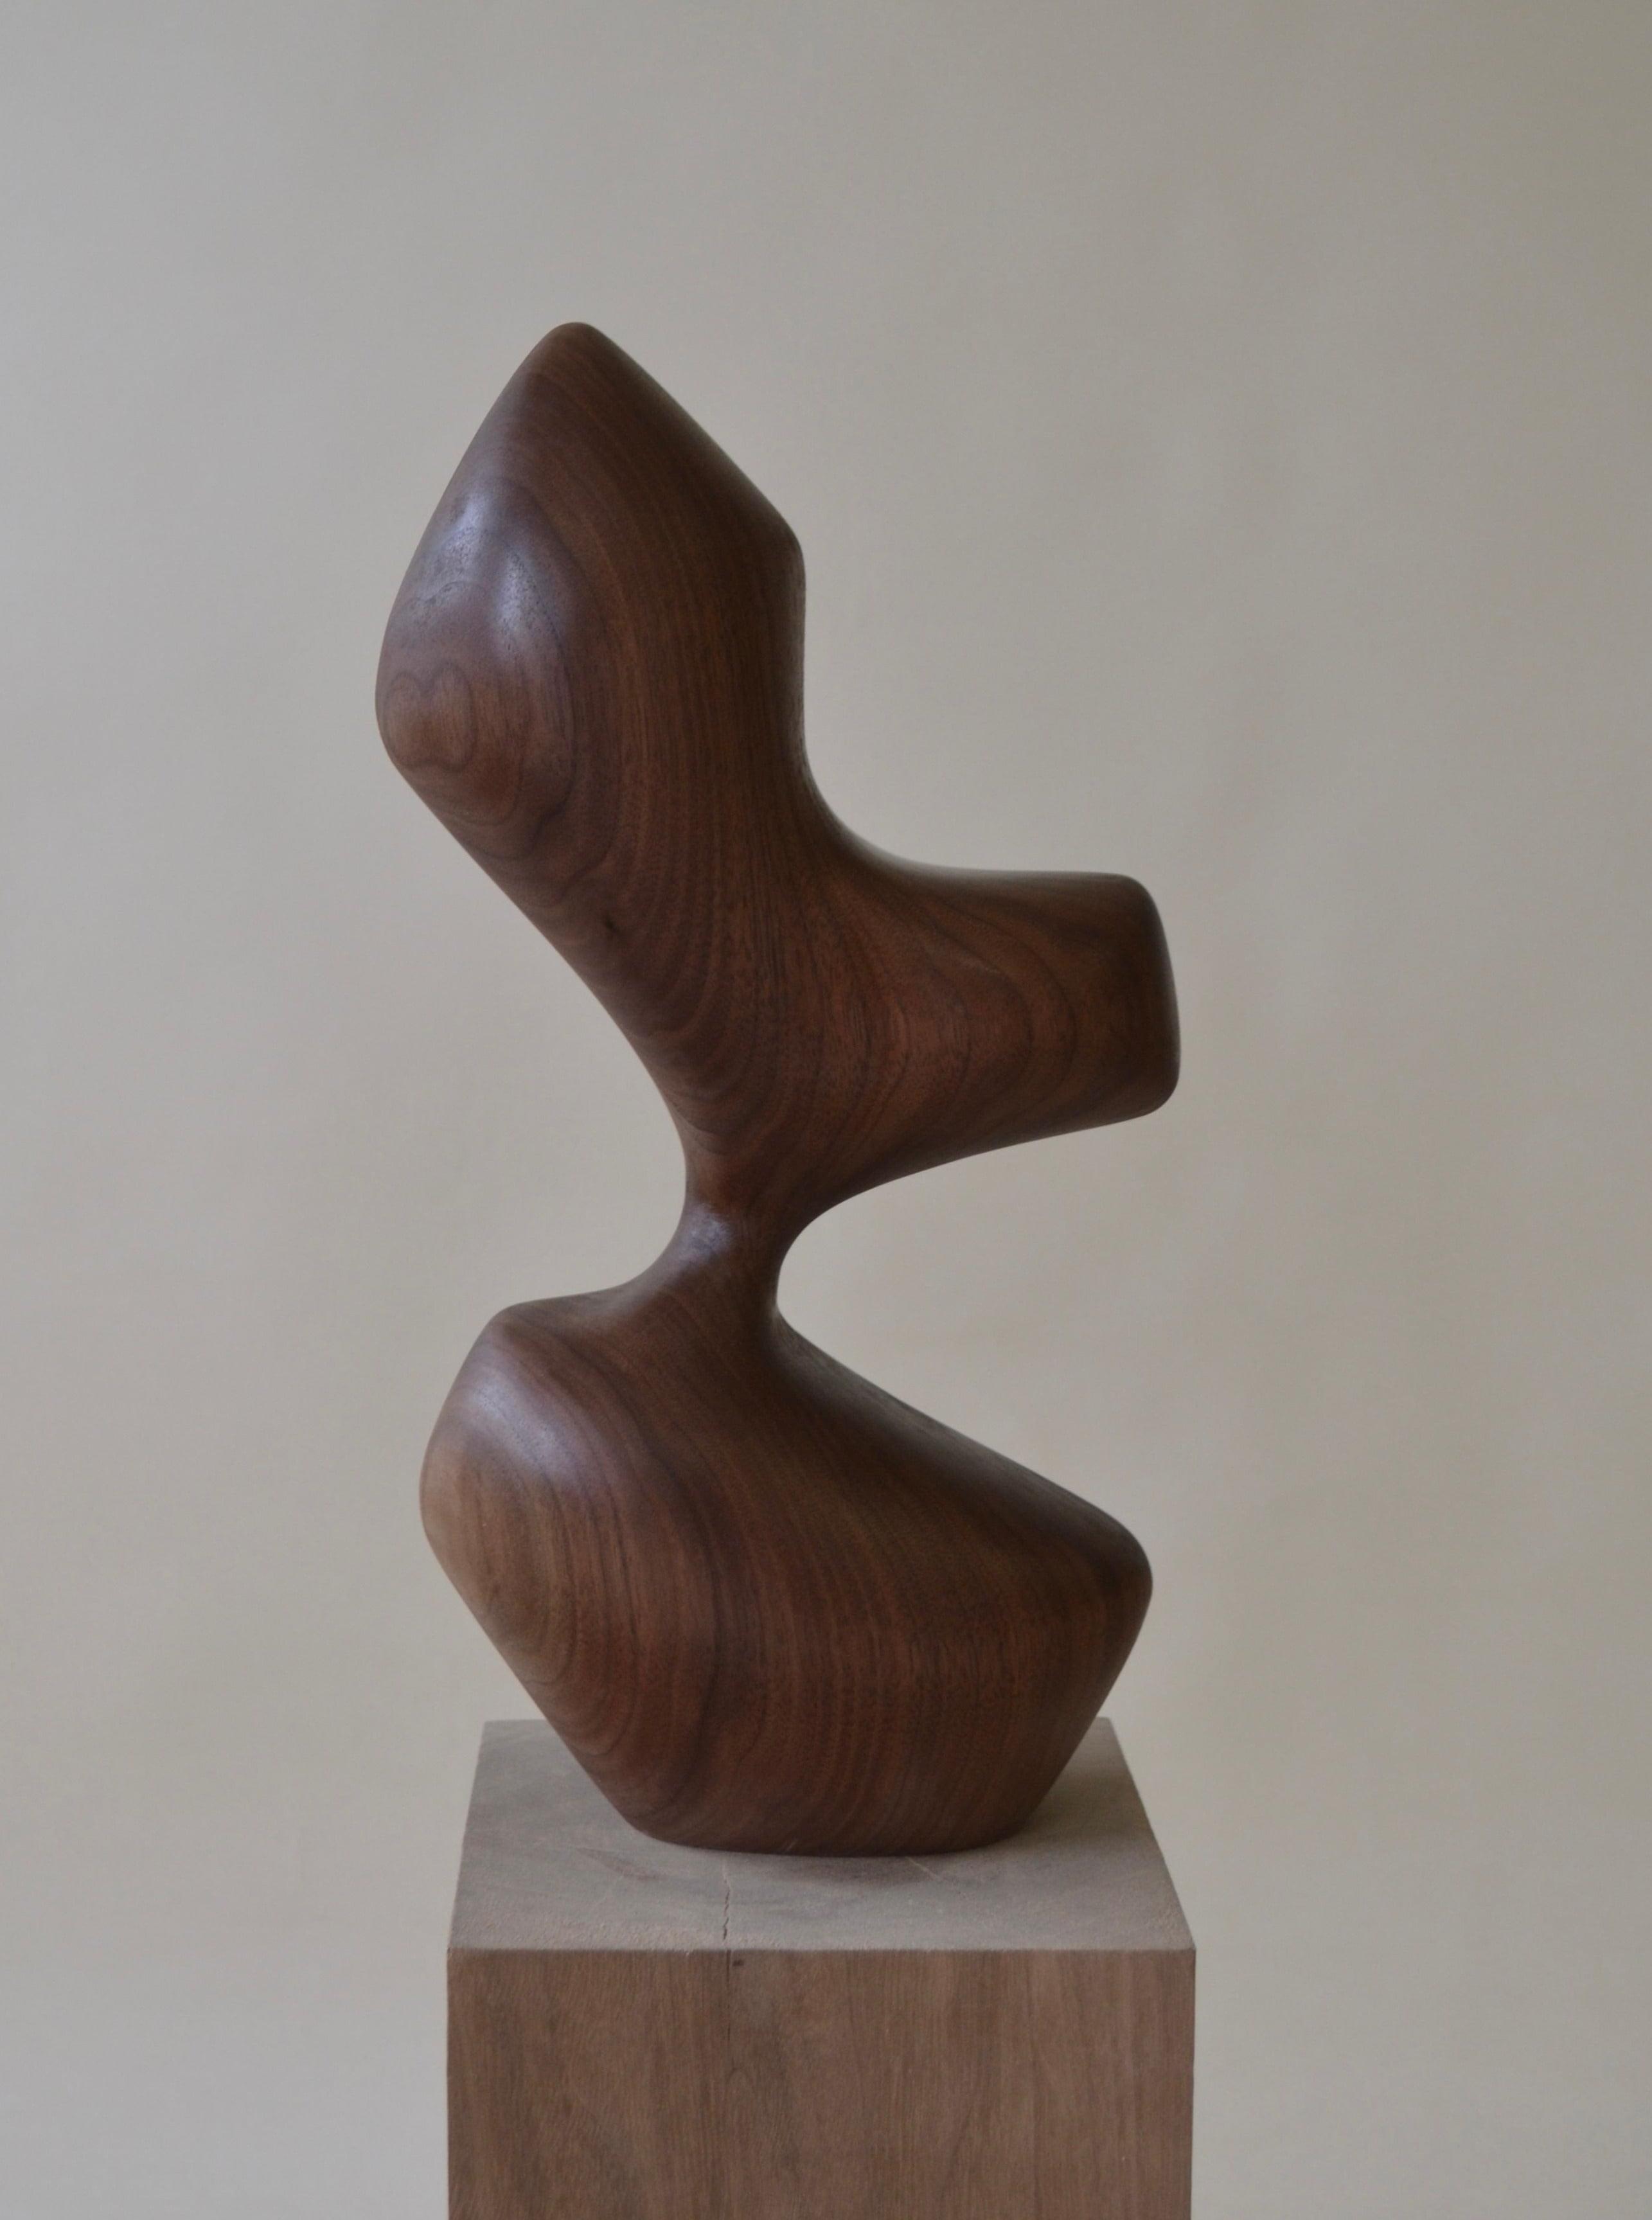 A Arbol wooden sculpture with a smooth, wavy form standing on a square pedestal, displaying rich, dark brown hues and visible wood grain patterns, perfect for home décor by Chandler McLellan.